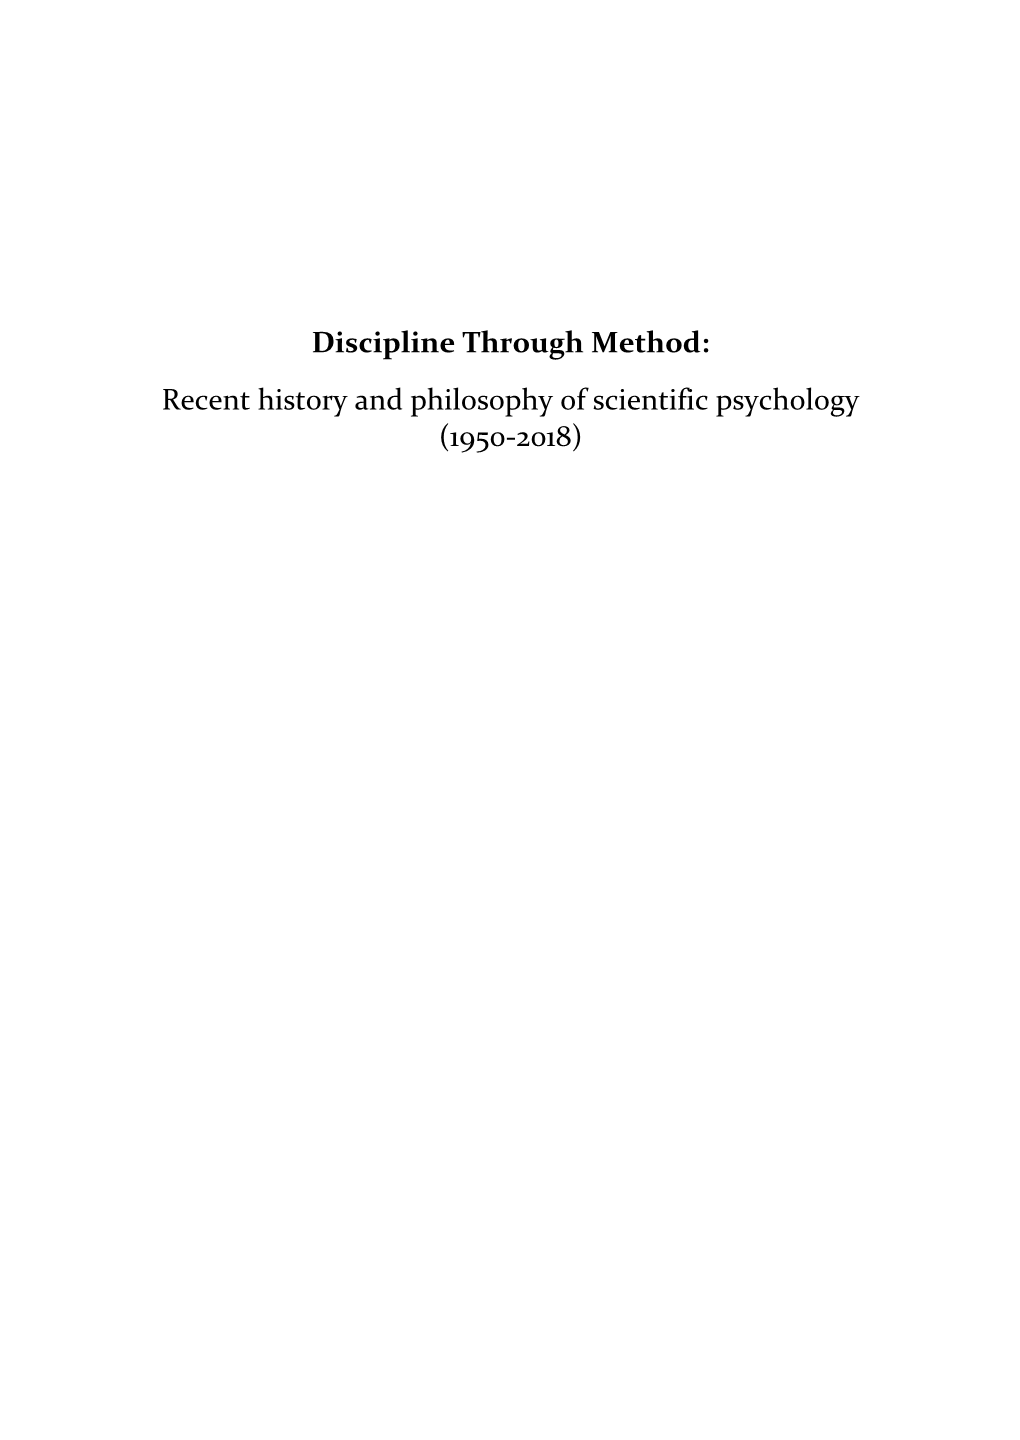 Recent History and Philosophy of Scientific Psychology (1950-2018)